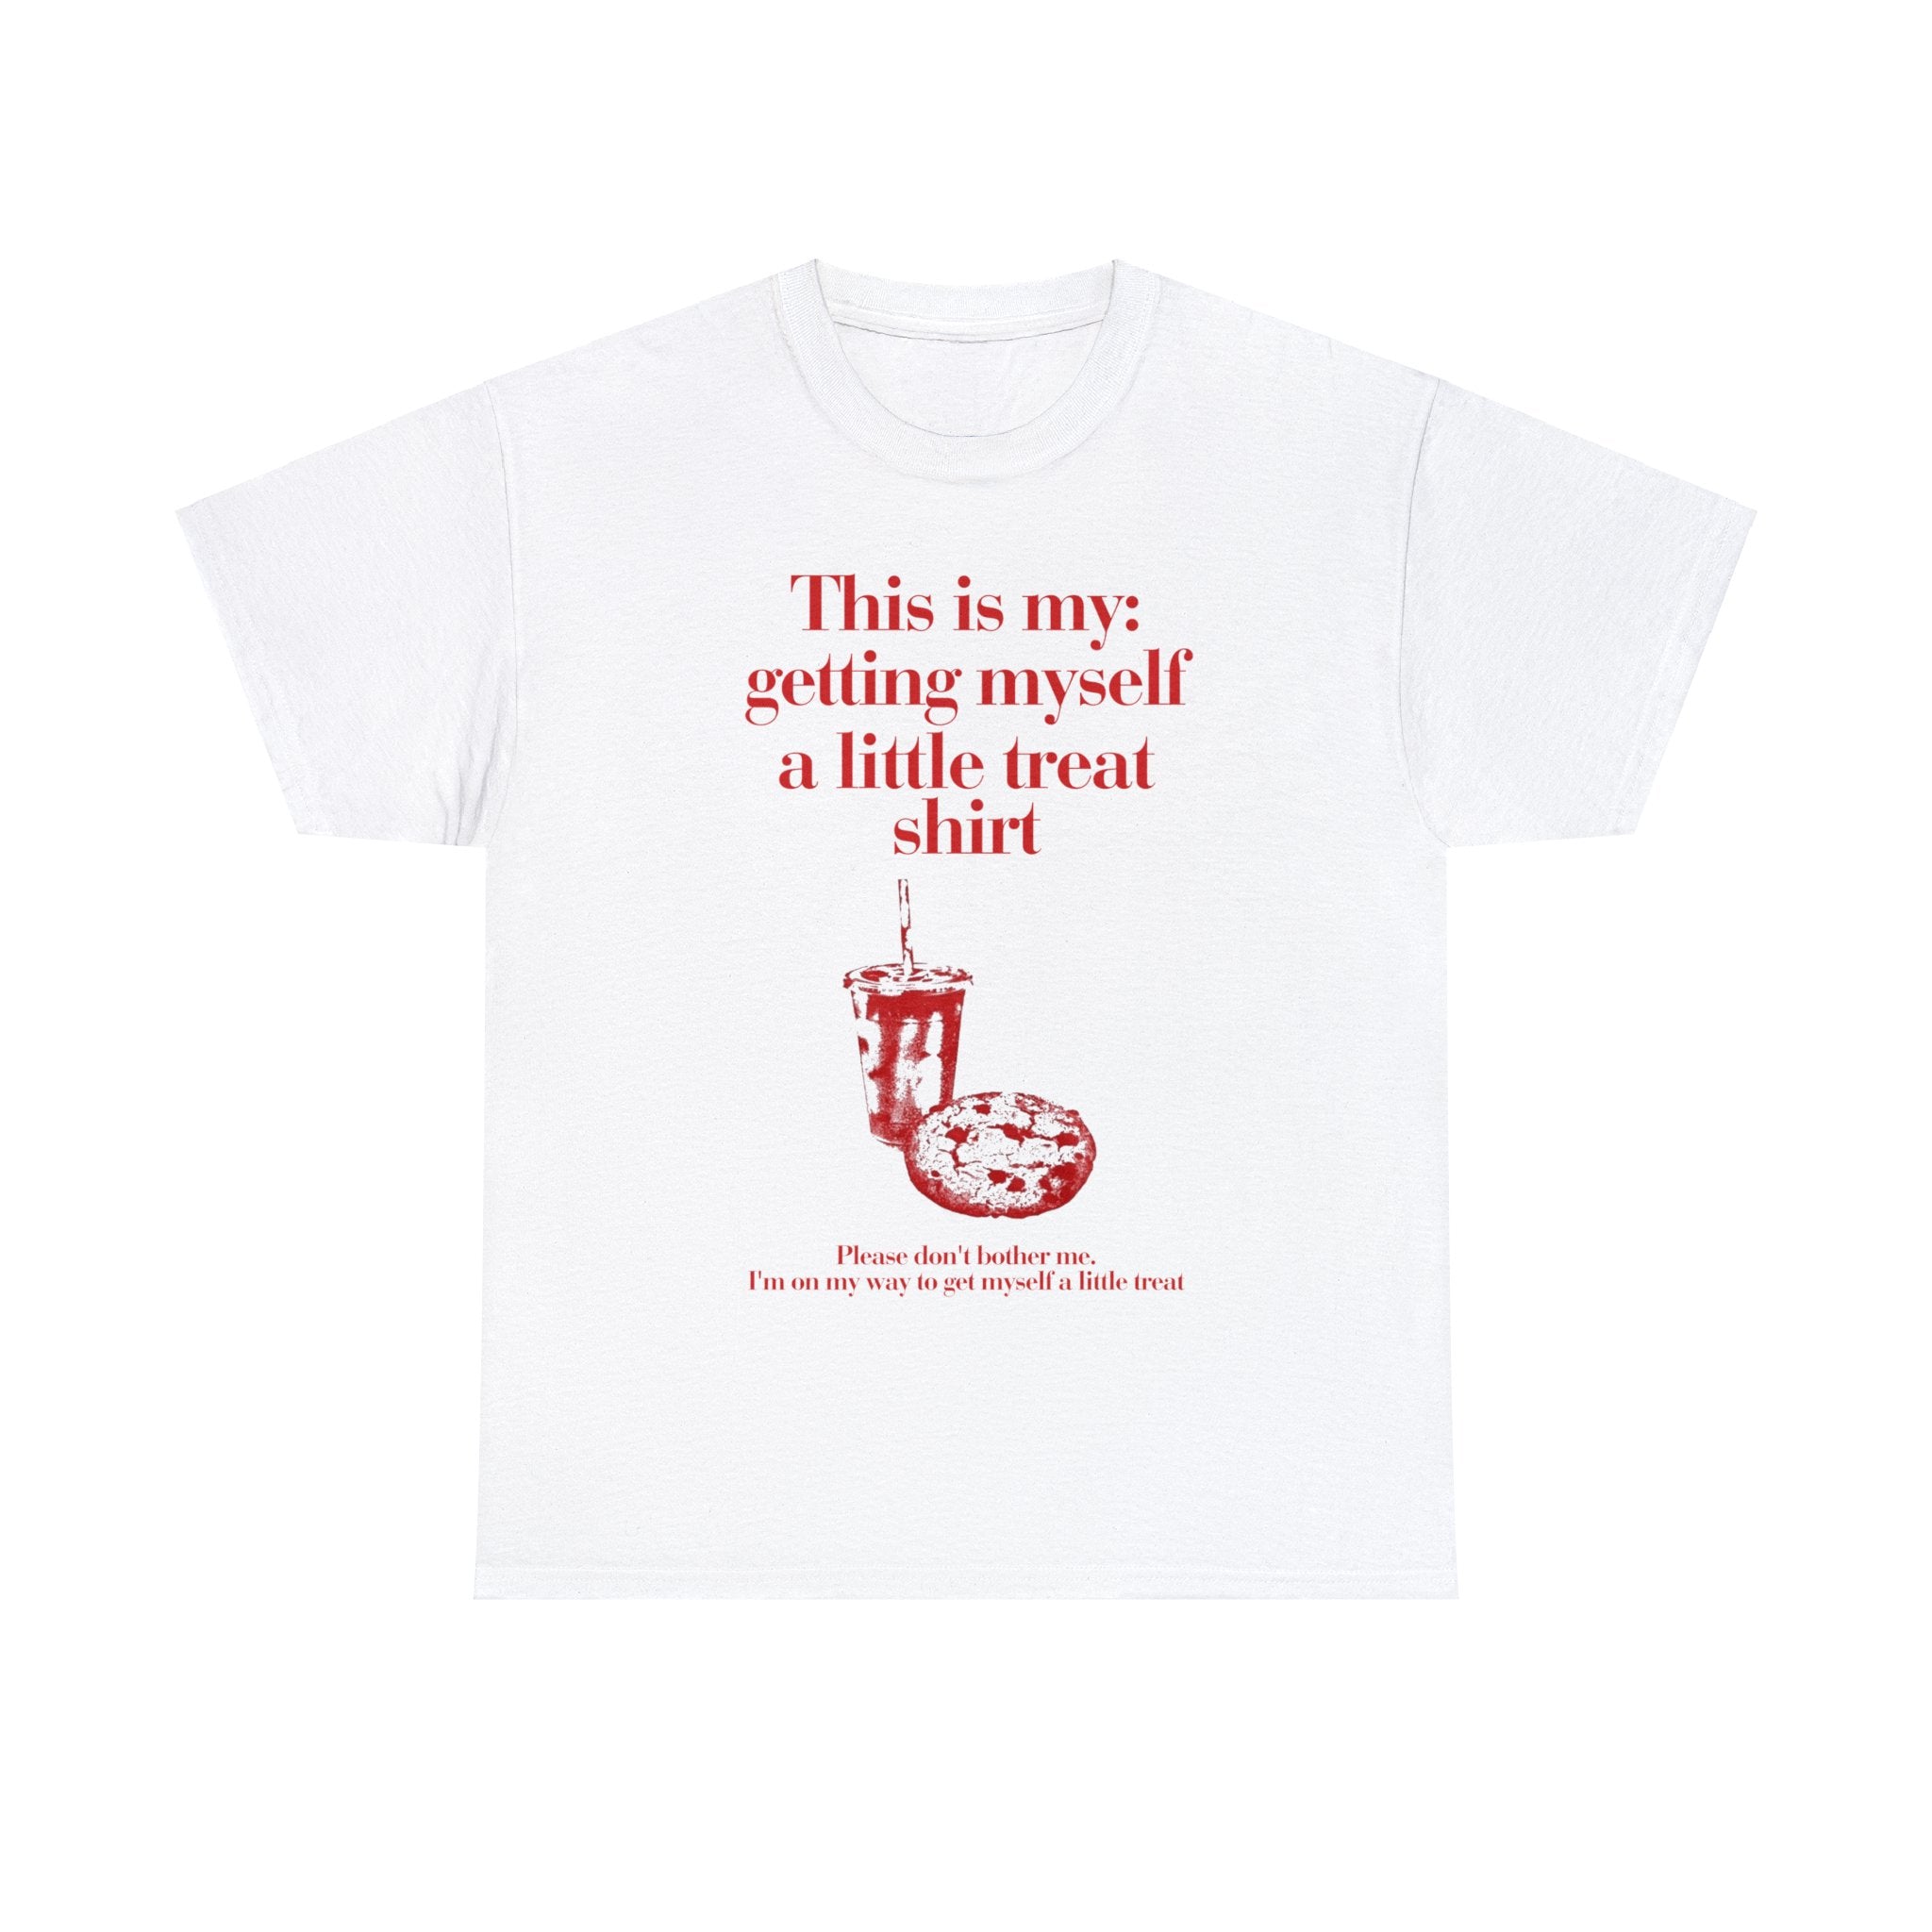 This is my getting myself a little treat shirt - Unisex Heavy Cotton Tee